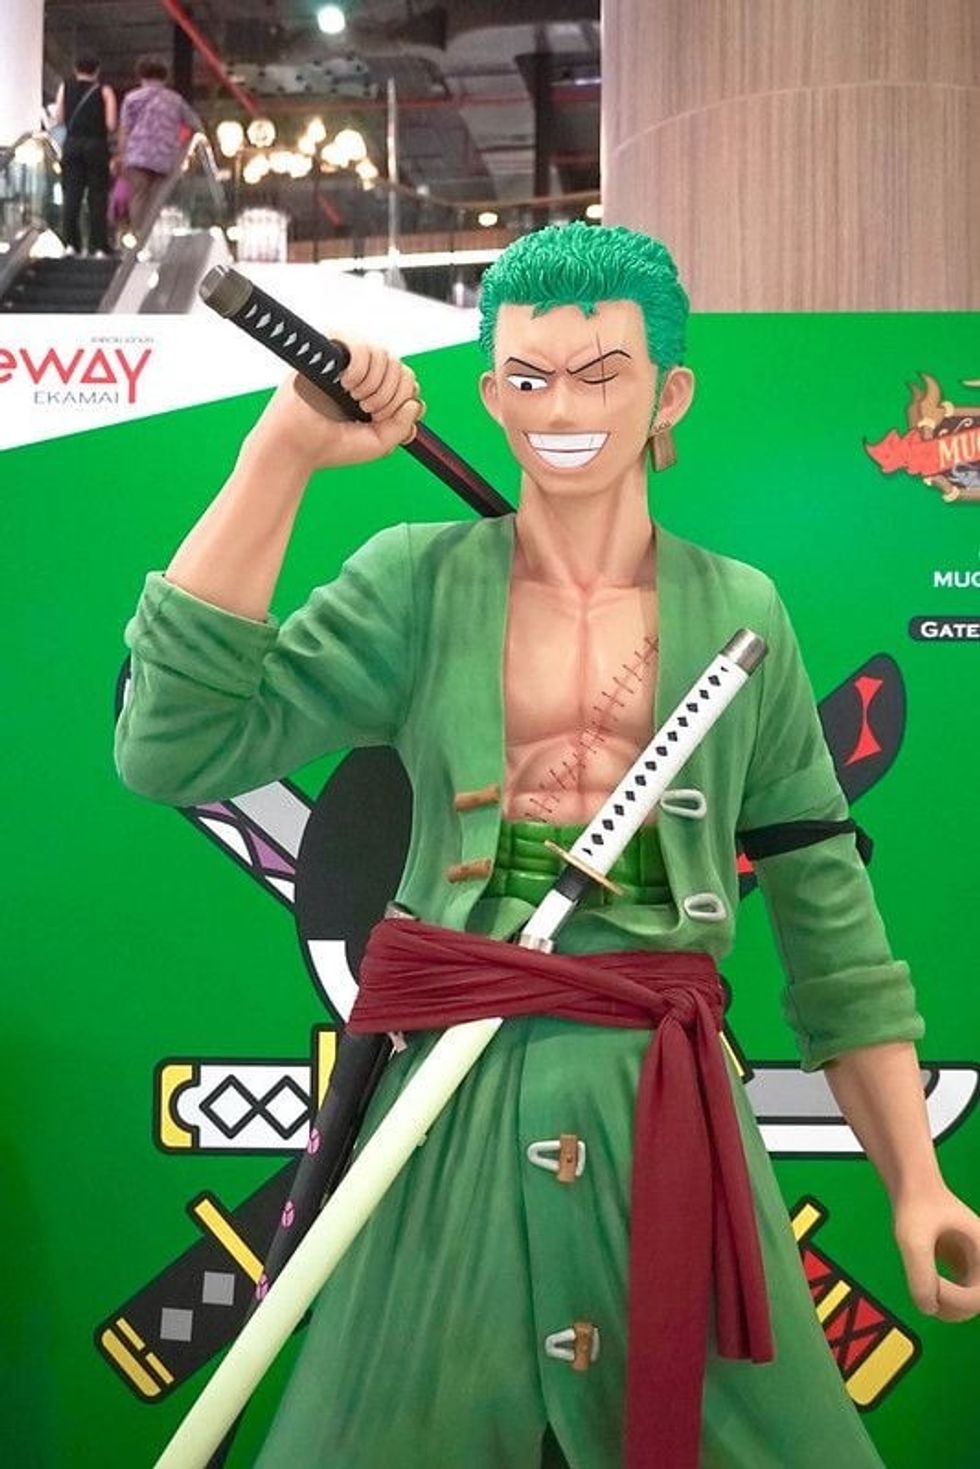 Swordsman statue in green outfit